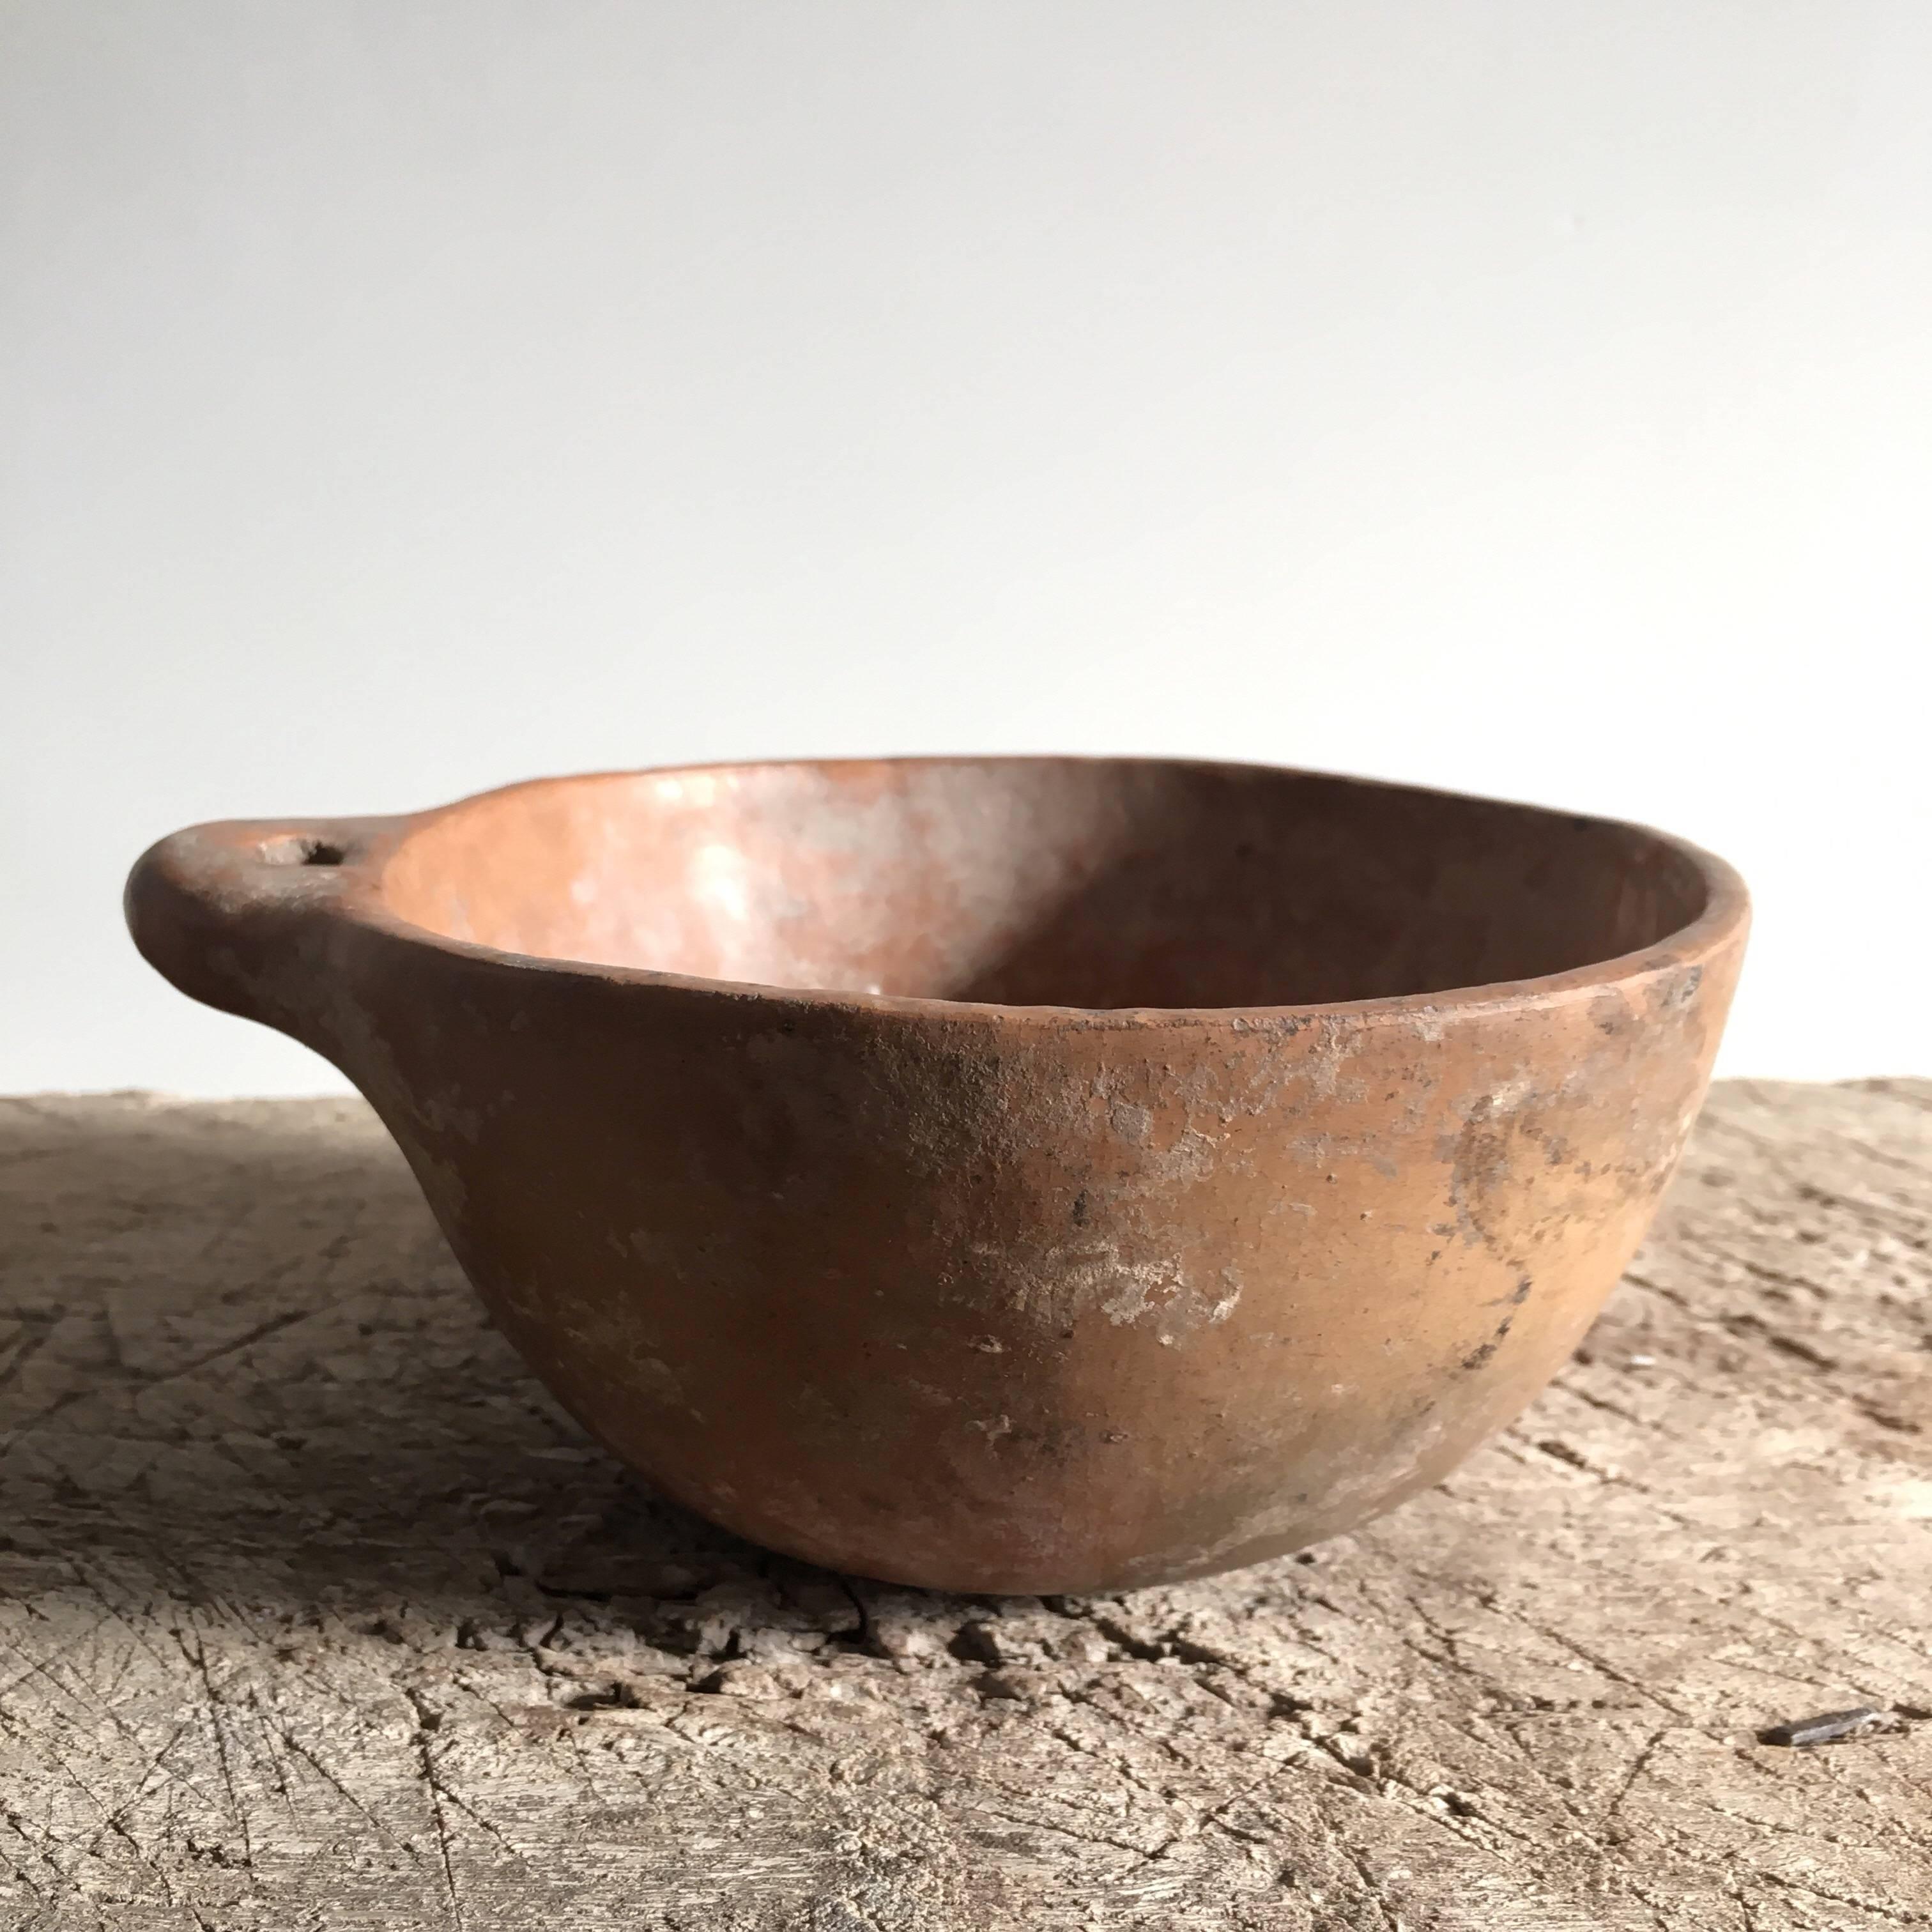 Rustic Ceramic Bowl from Mexico